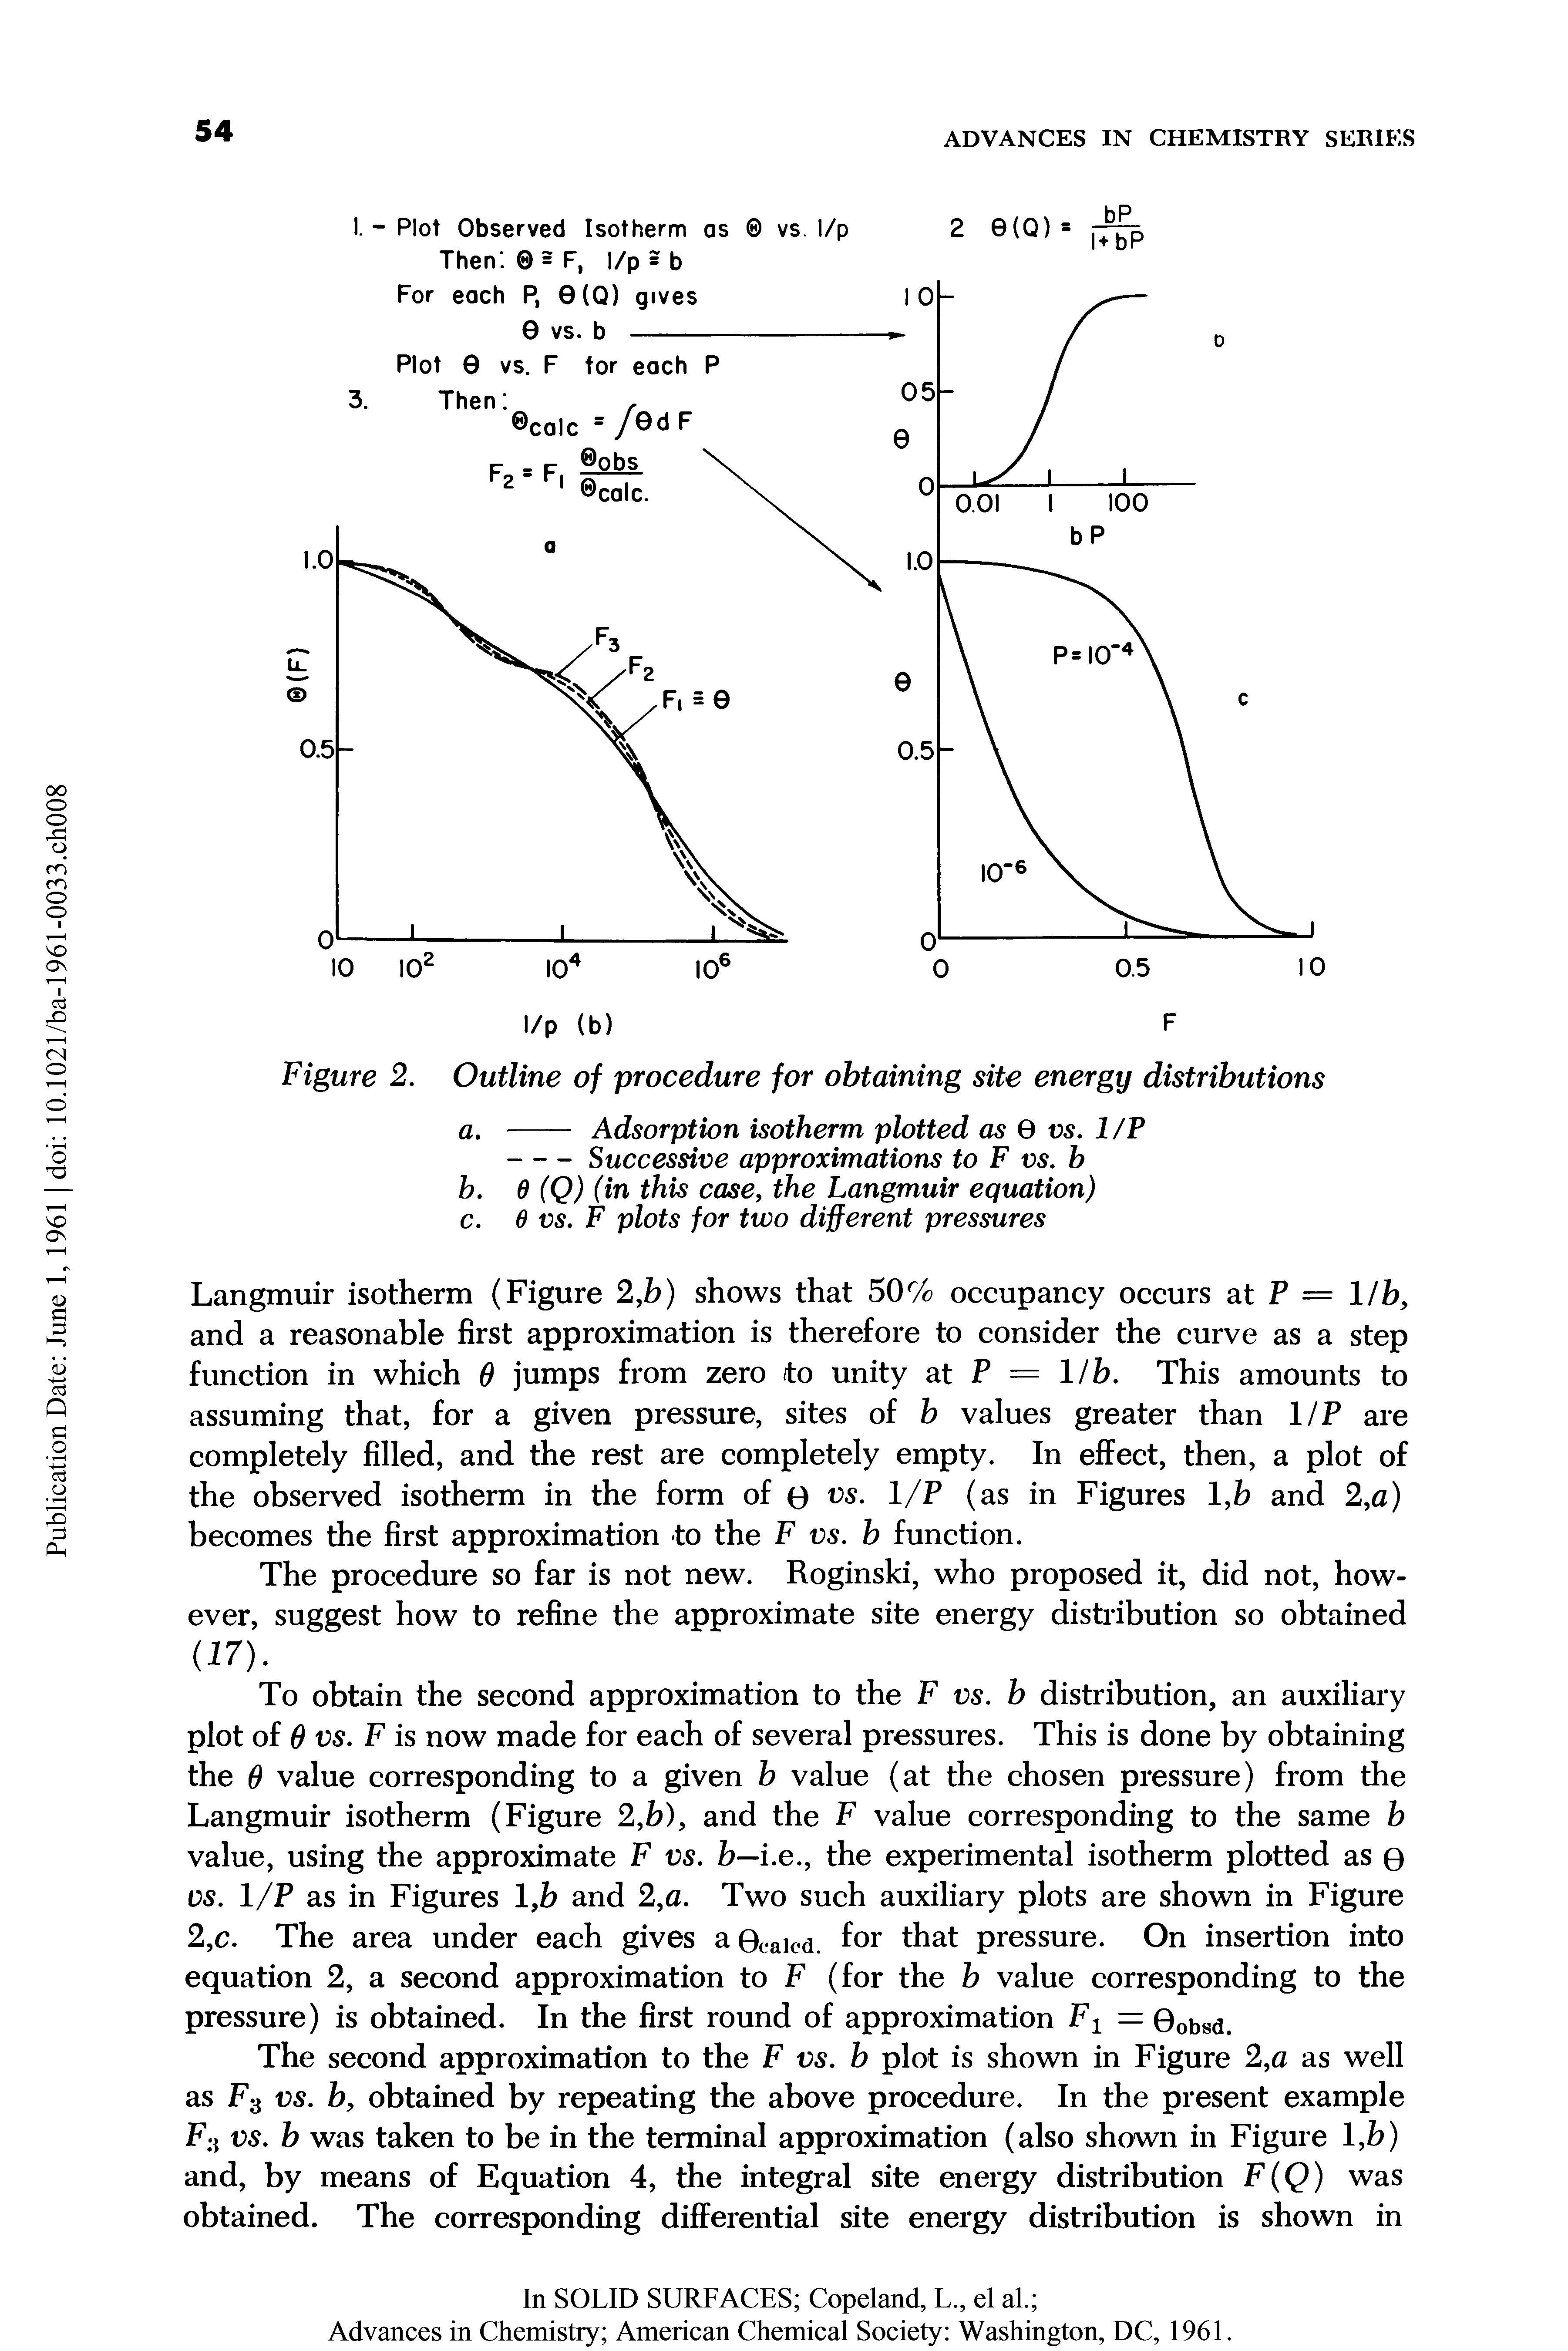 Figure 2. Outline of procedure for obtaining site energy distributions...